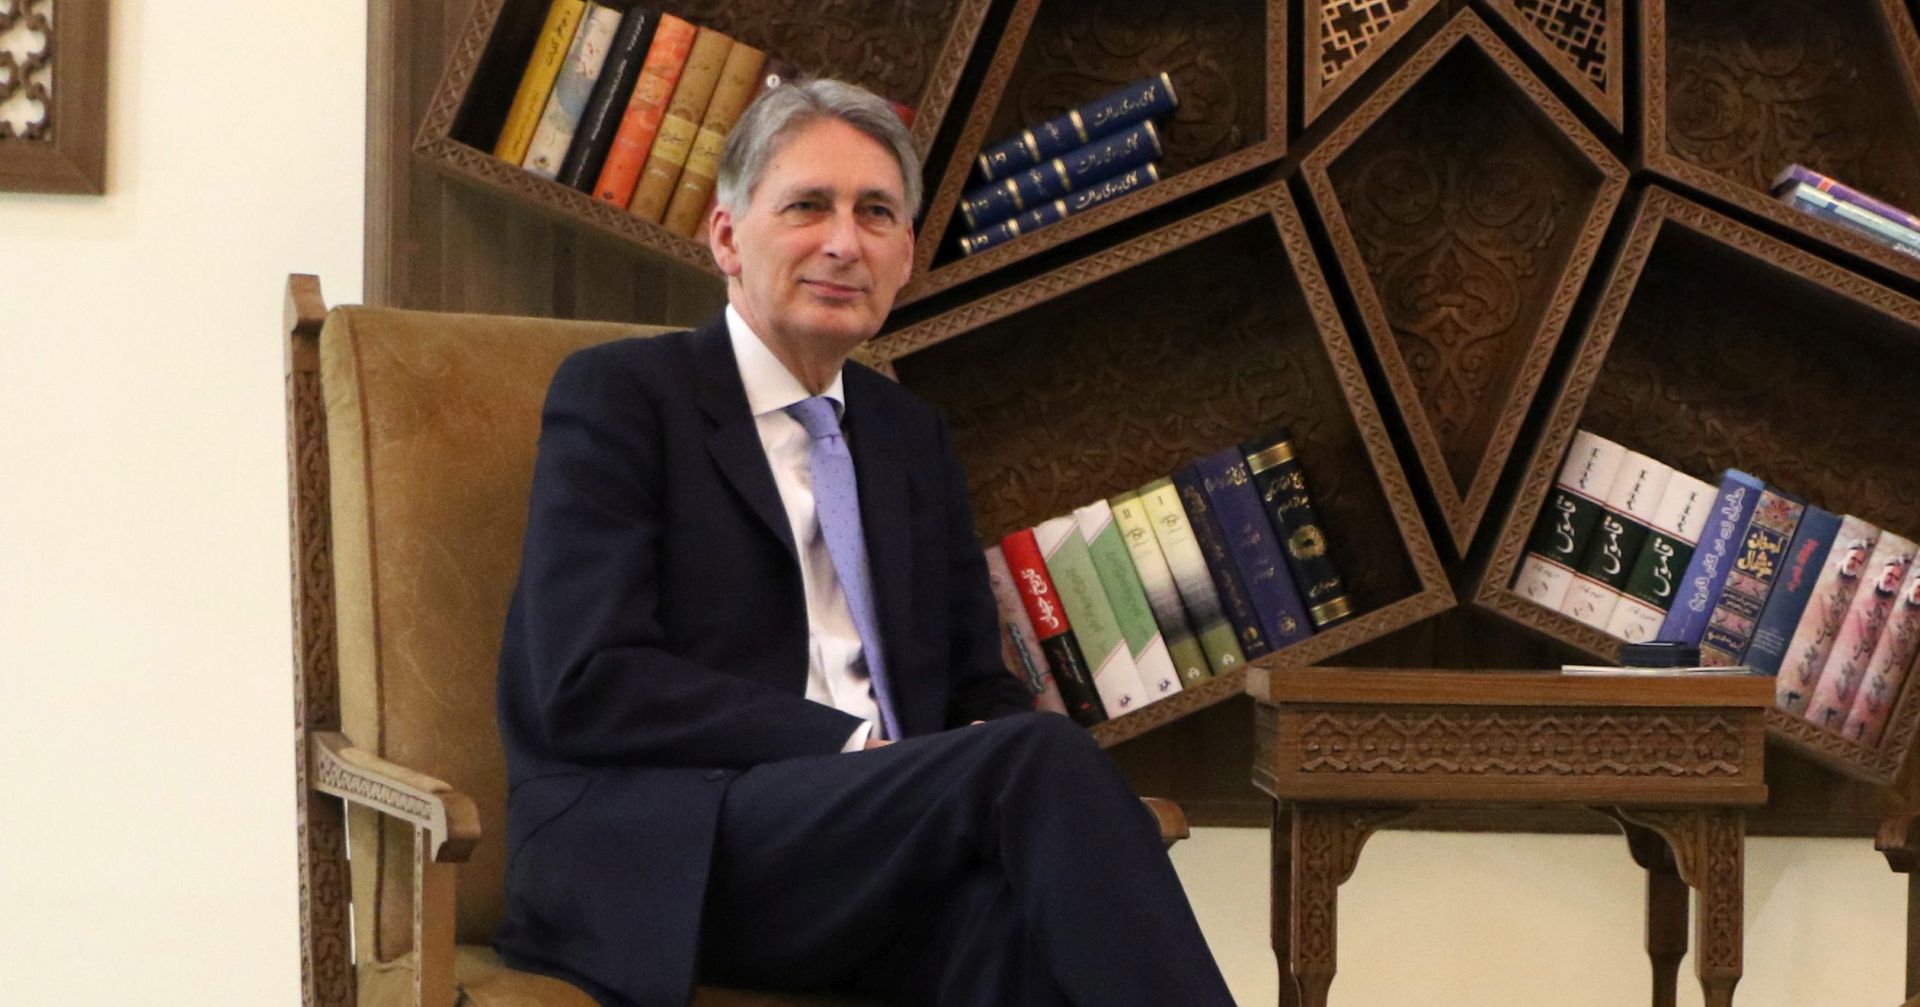 epa05199781 Afghanistan's Chief Executive Abdullah Abdullah (R) talks with British Foreign Secretary Phillip Hammond (L) during their meeting in Kabul, Afghanistan, 07 March 2016. Hammond is on an official visit to Kabul to discuss issues of mutual interest and regional security.  EPA/HEDAYATULLAH AMID